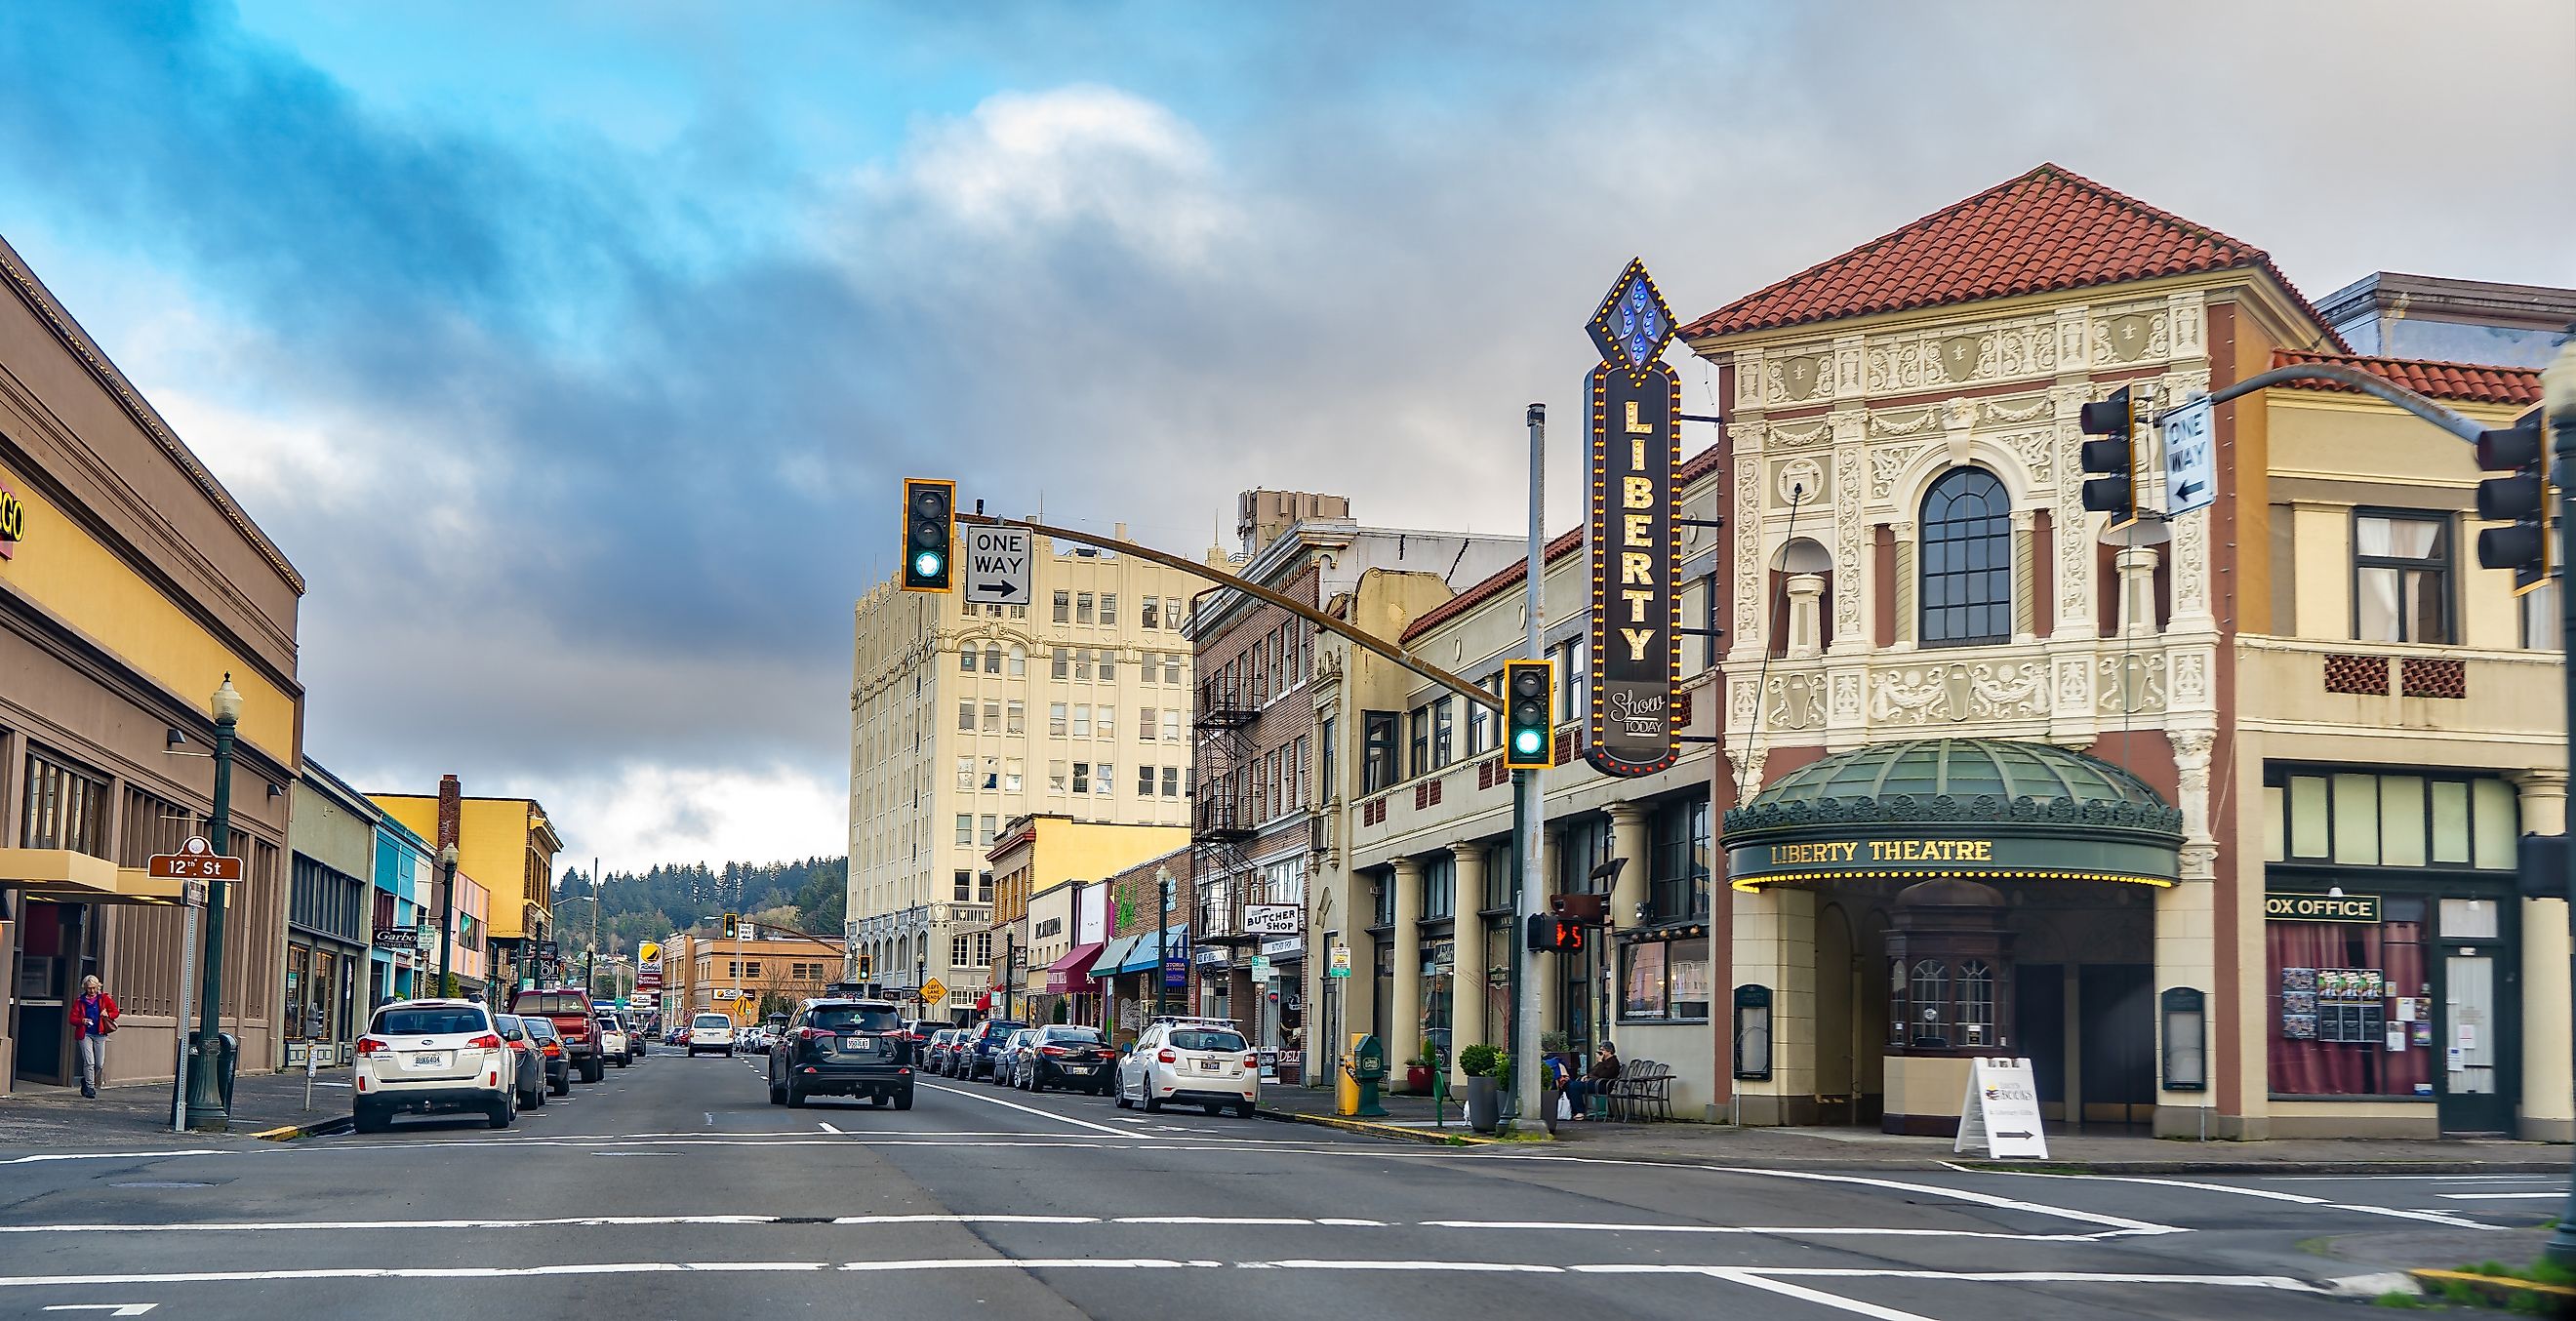 The Historic Liberty Theater and downtown Astoria. Editorial credit: Bob Pool / Shutterstock.com